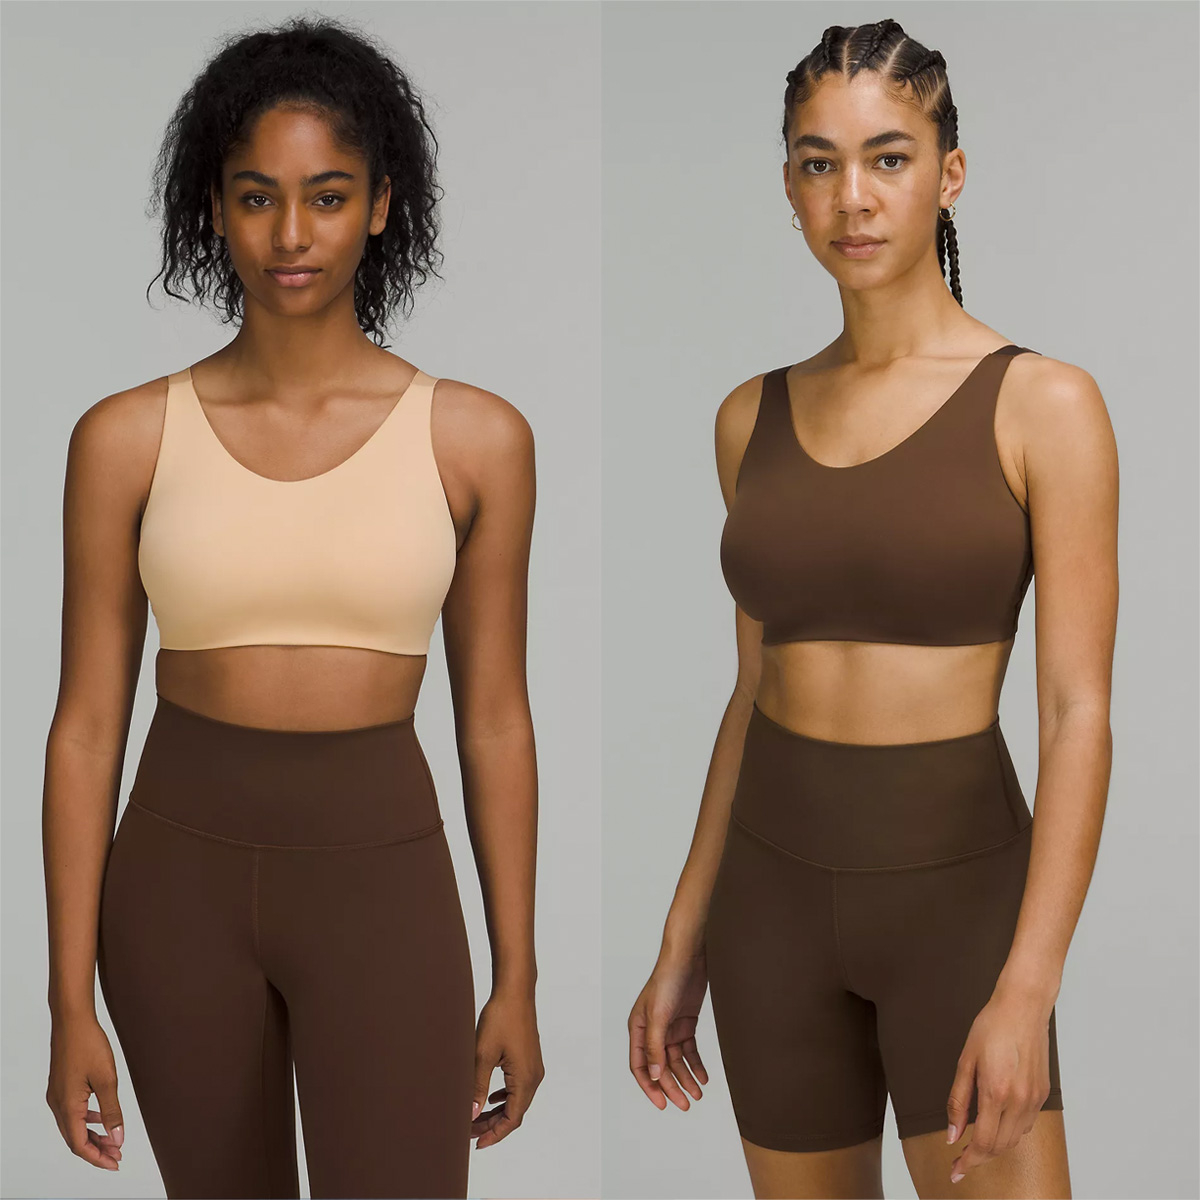 Lululemon Air Support Sports Bra Is Perfect for Women With Large Breasts